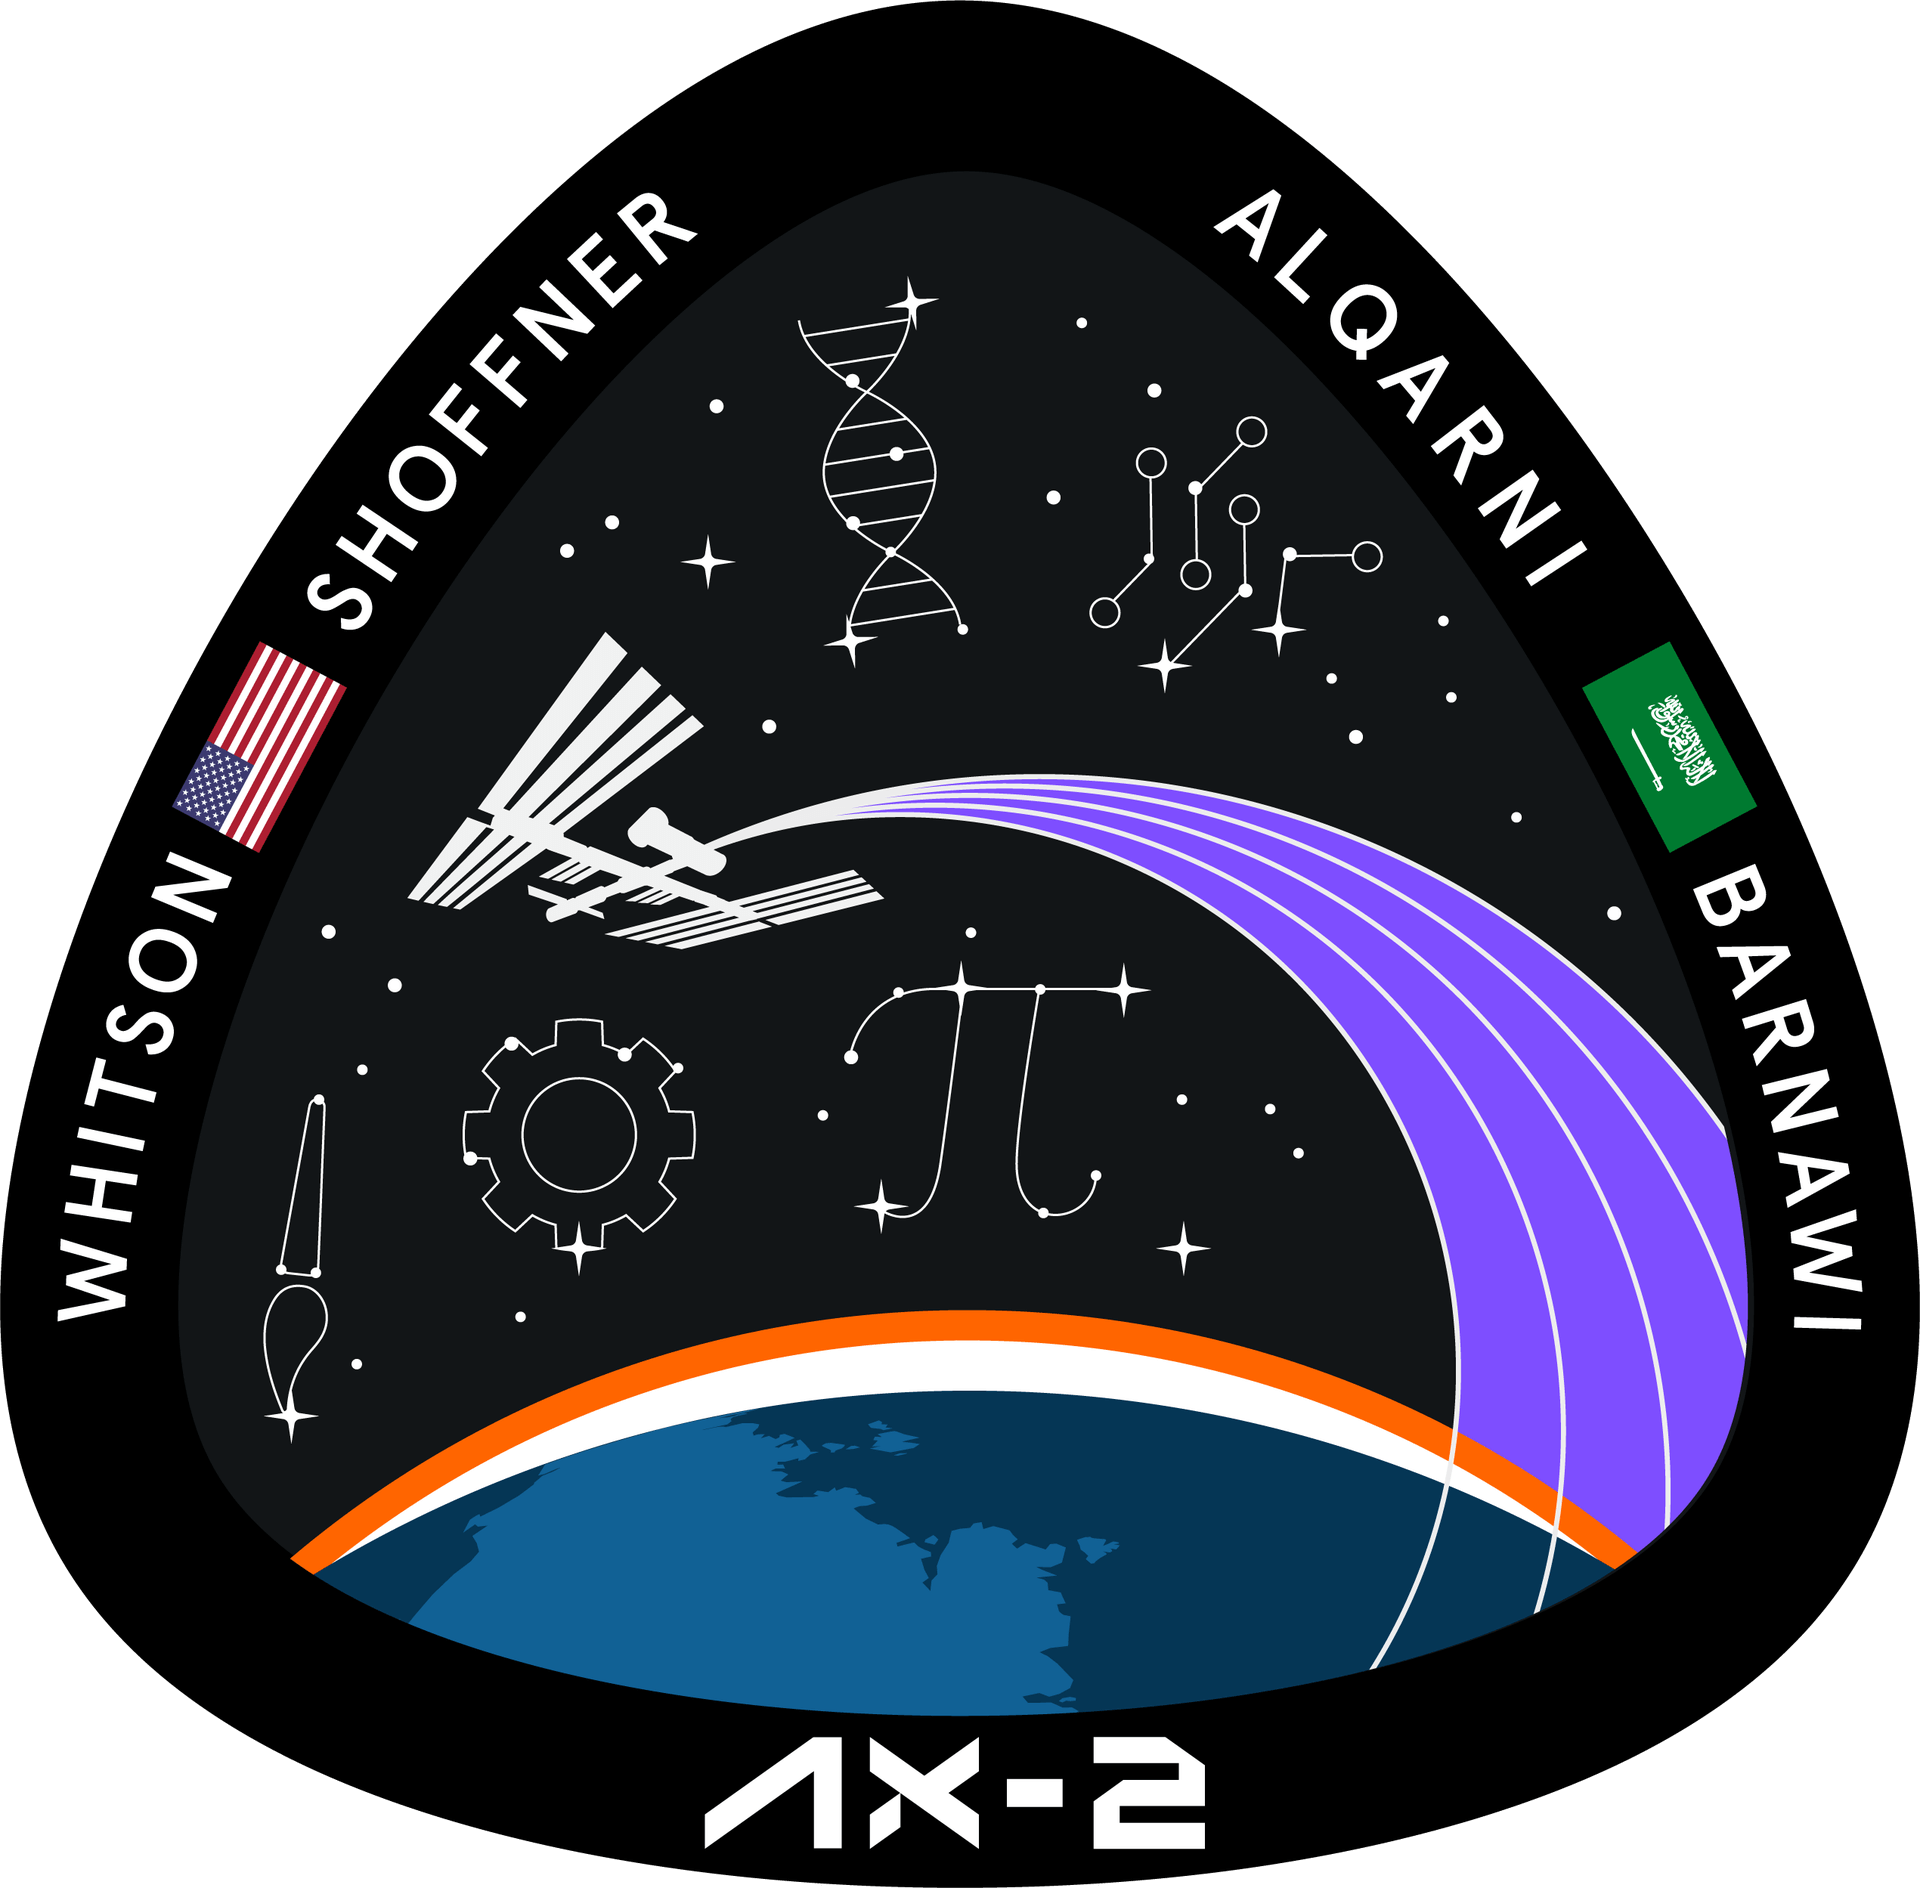 Axiom Space Mission 2